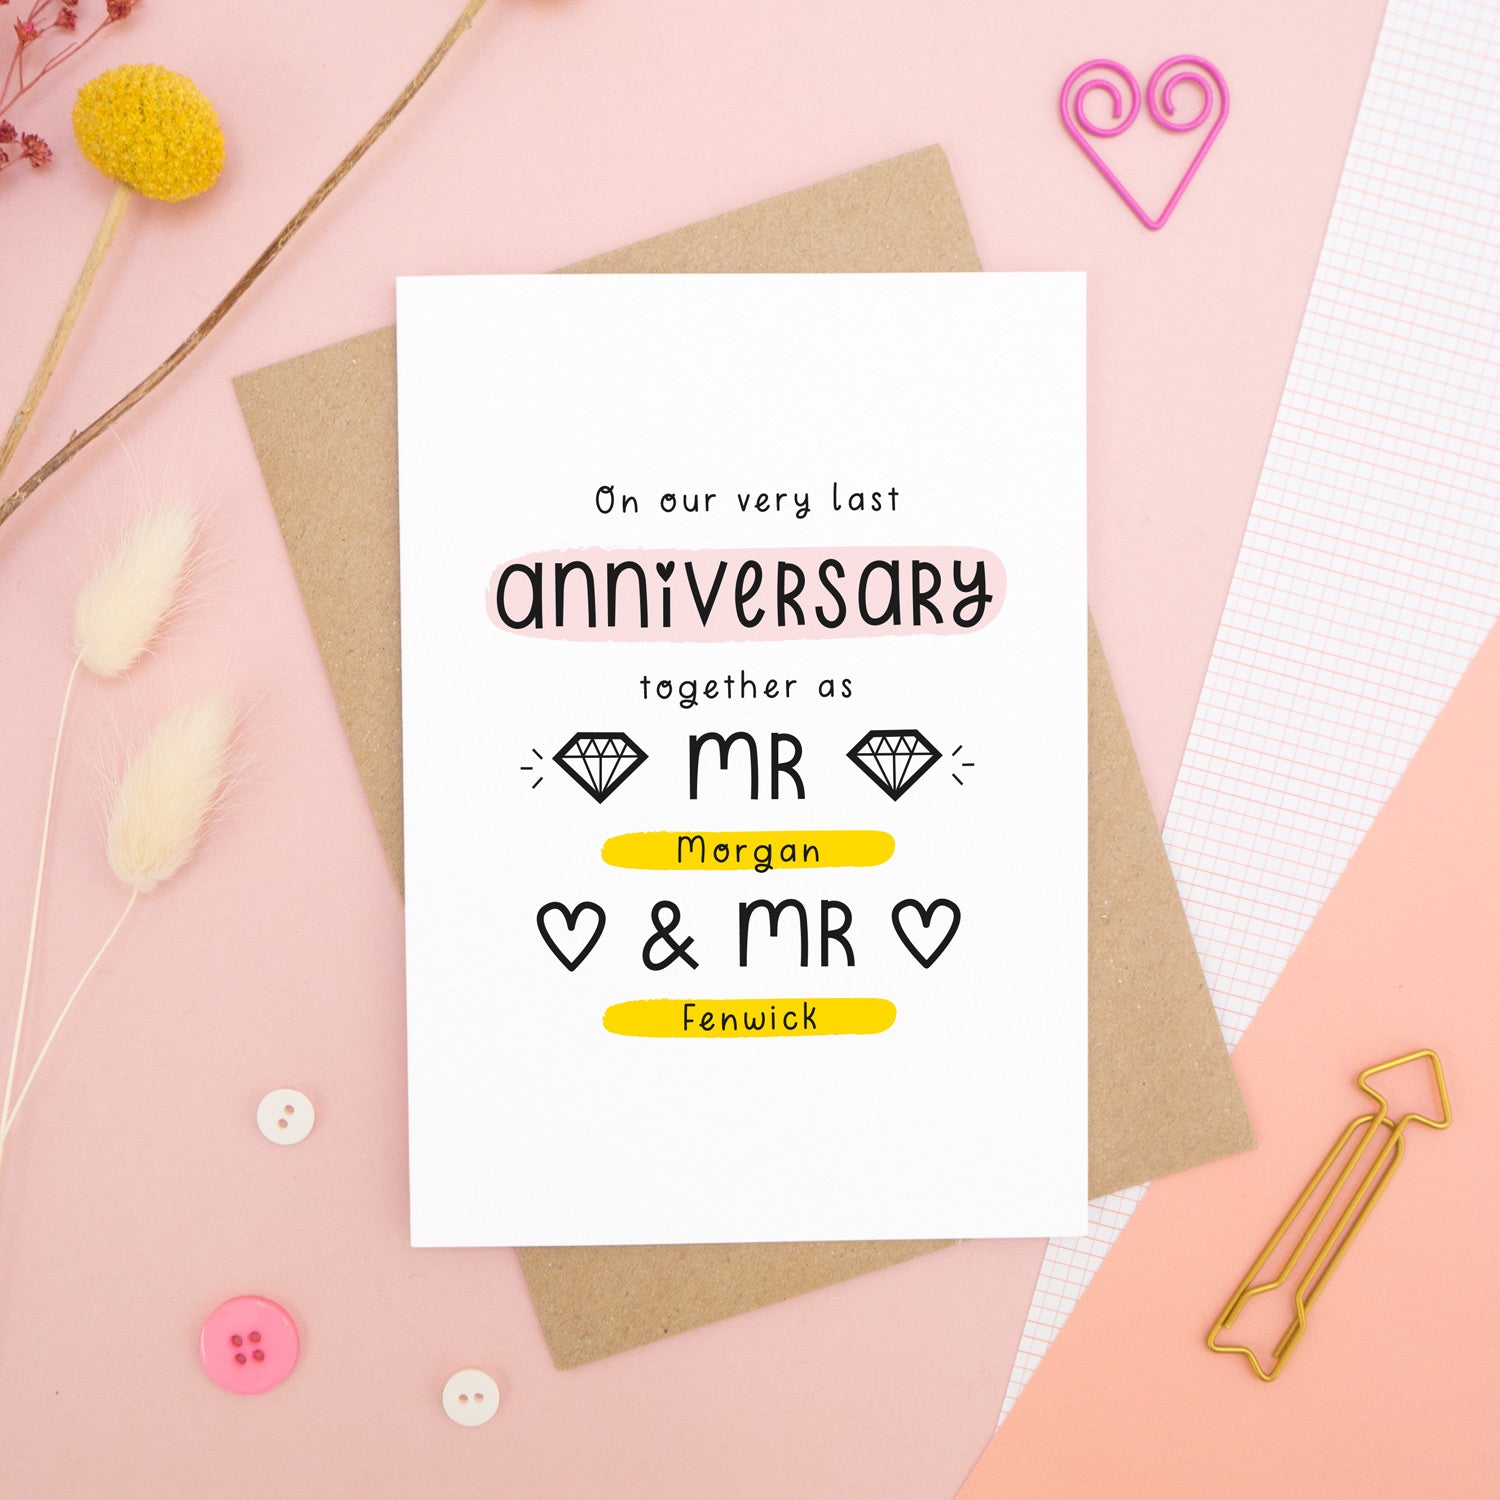 A personalised last anniversary or Valentine’s card photographed on a pink background with floral props, paper clips, and buttons. This image shows the last anniversary option with the Mr & Mr wording. The text is black and there are pops of yellow and pink behind key words.